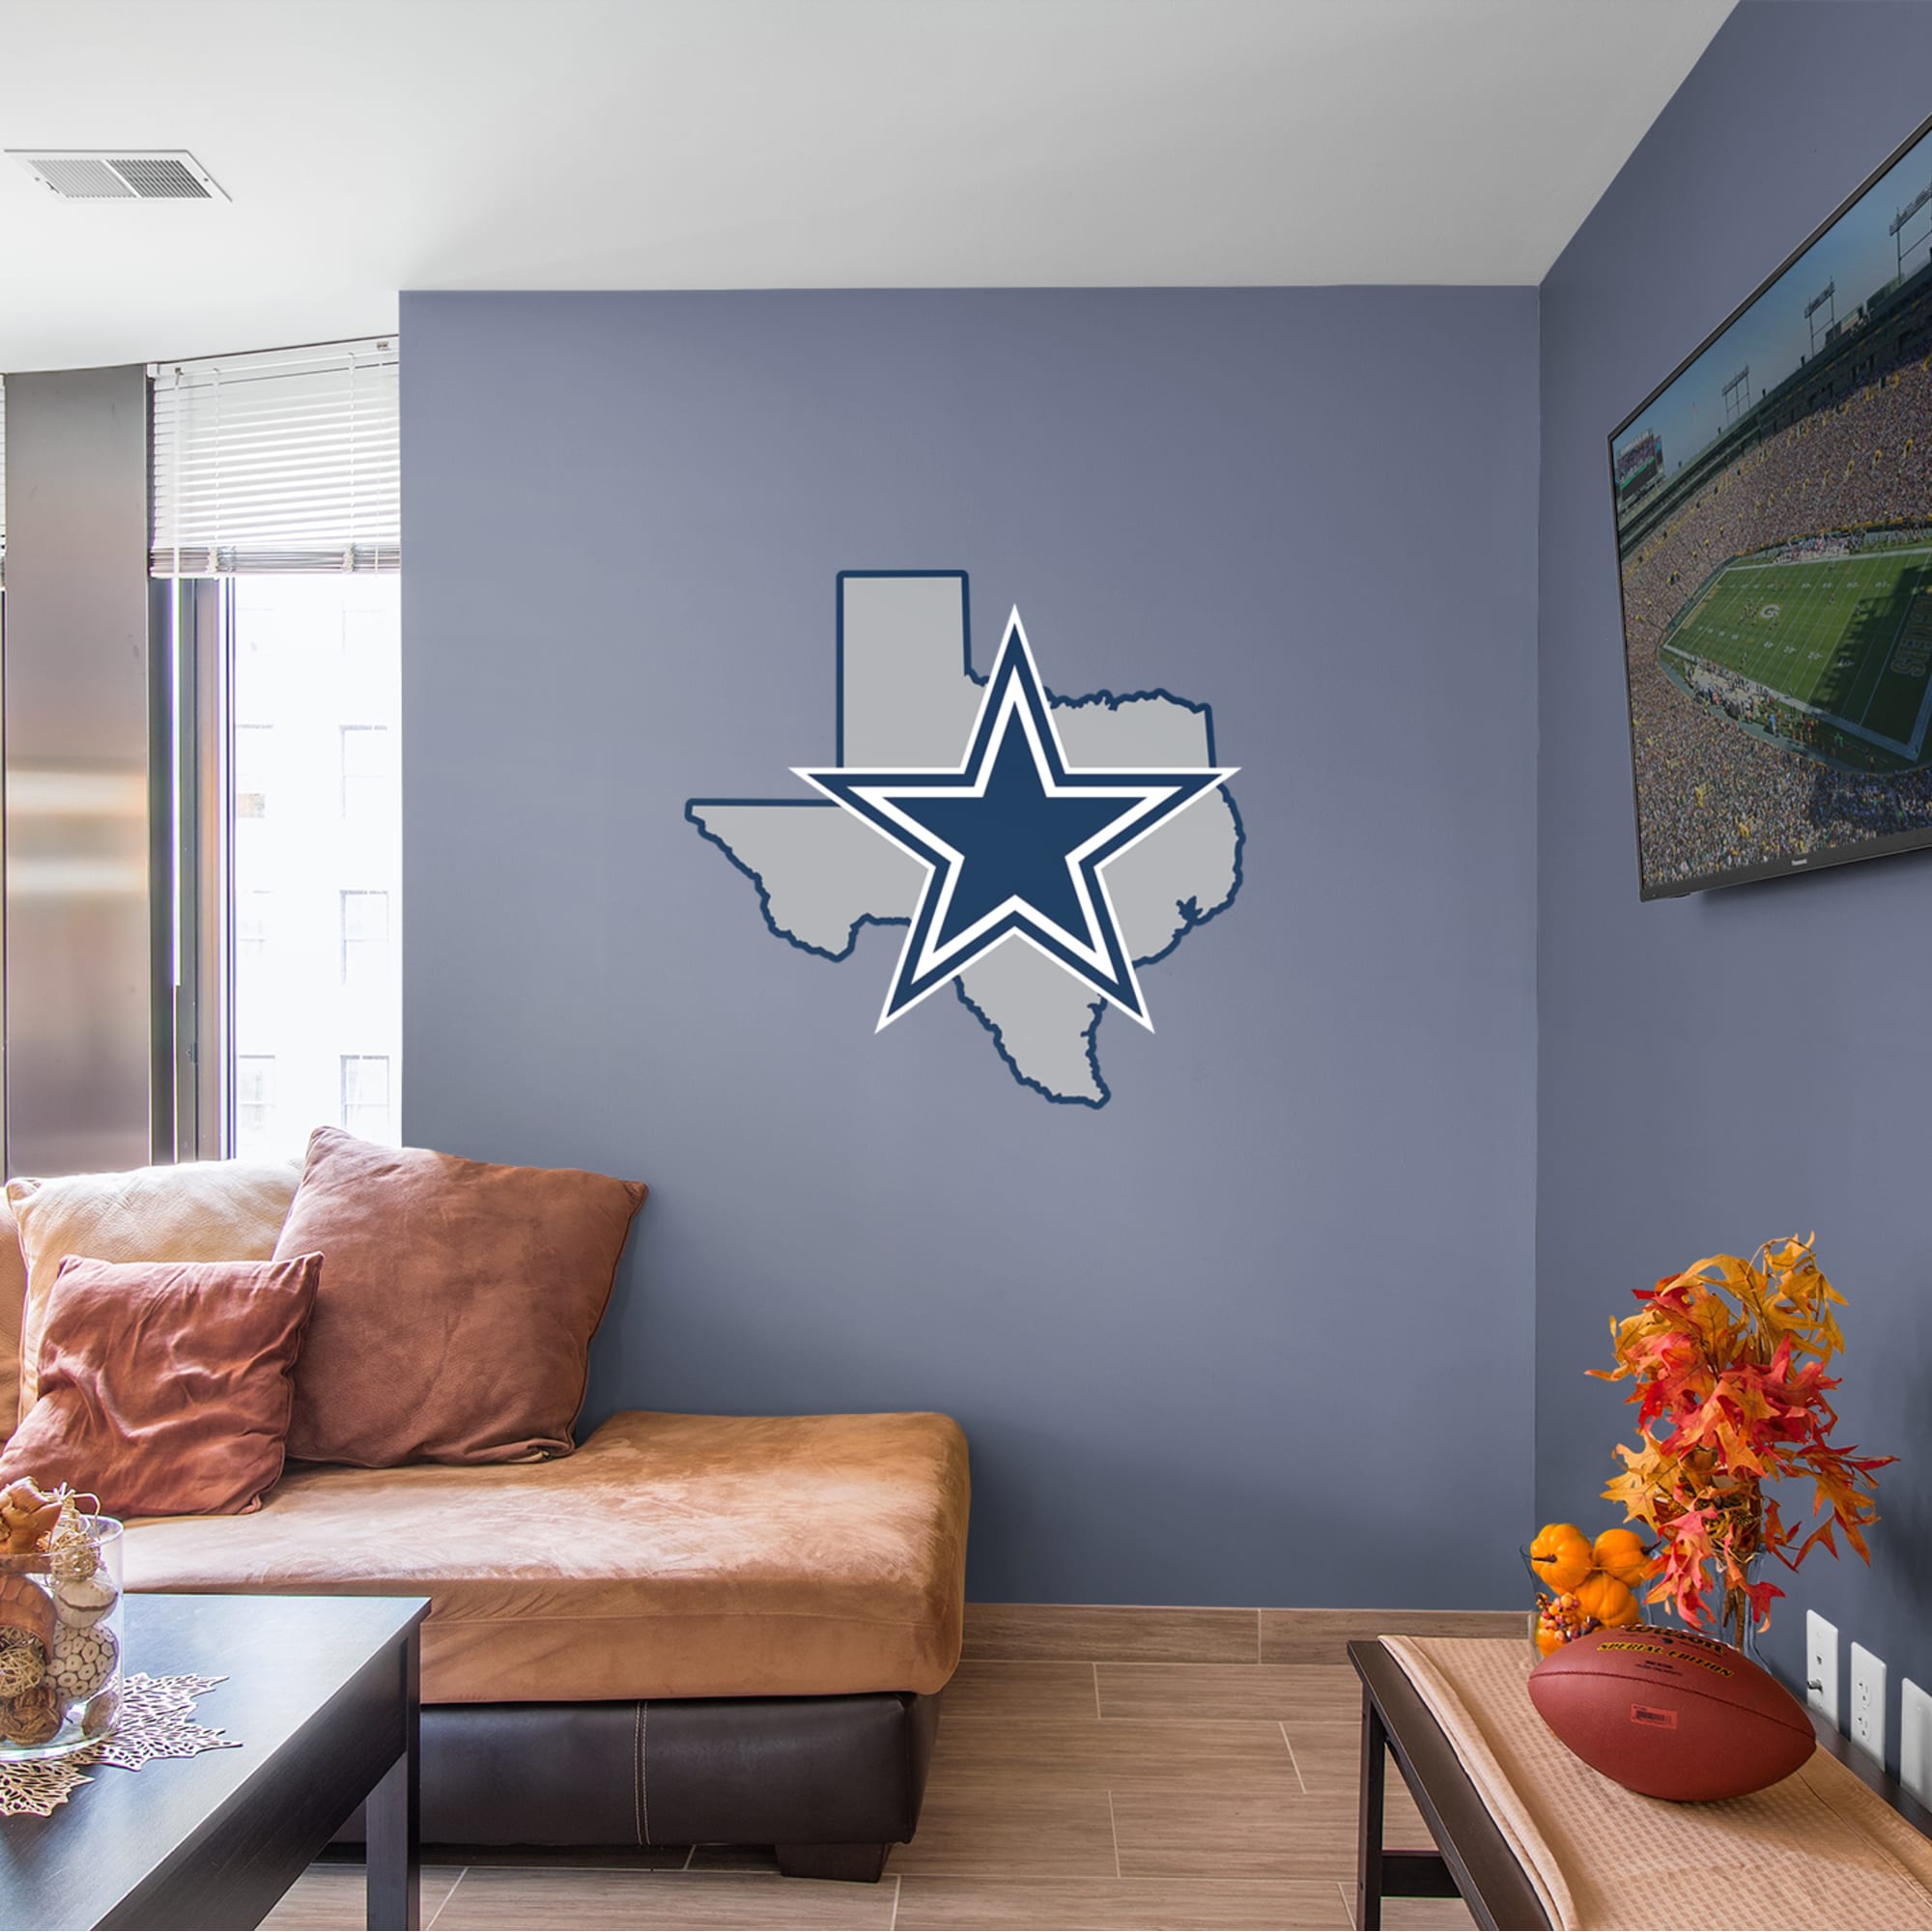 Dallas Cowboys: State of Texas - Officially Licensed NFL Removable Wall Decal 40.0"W x 38.0"H by Fathead | Vinyl